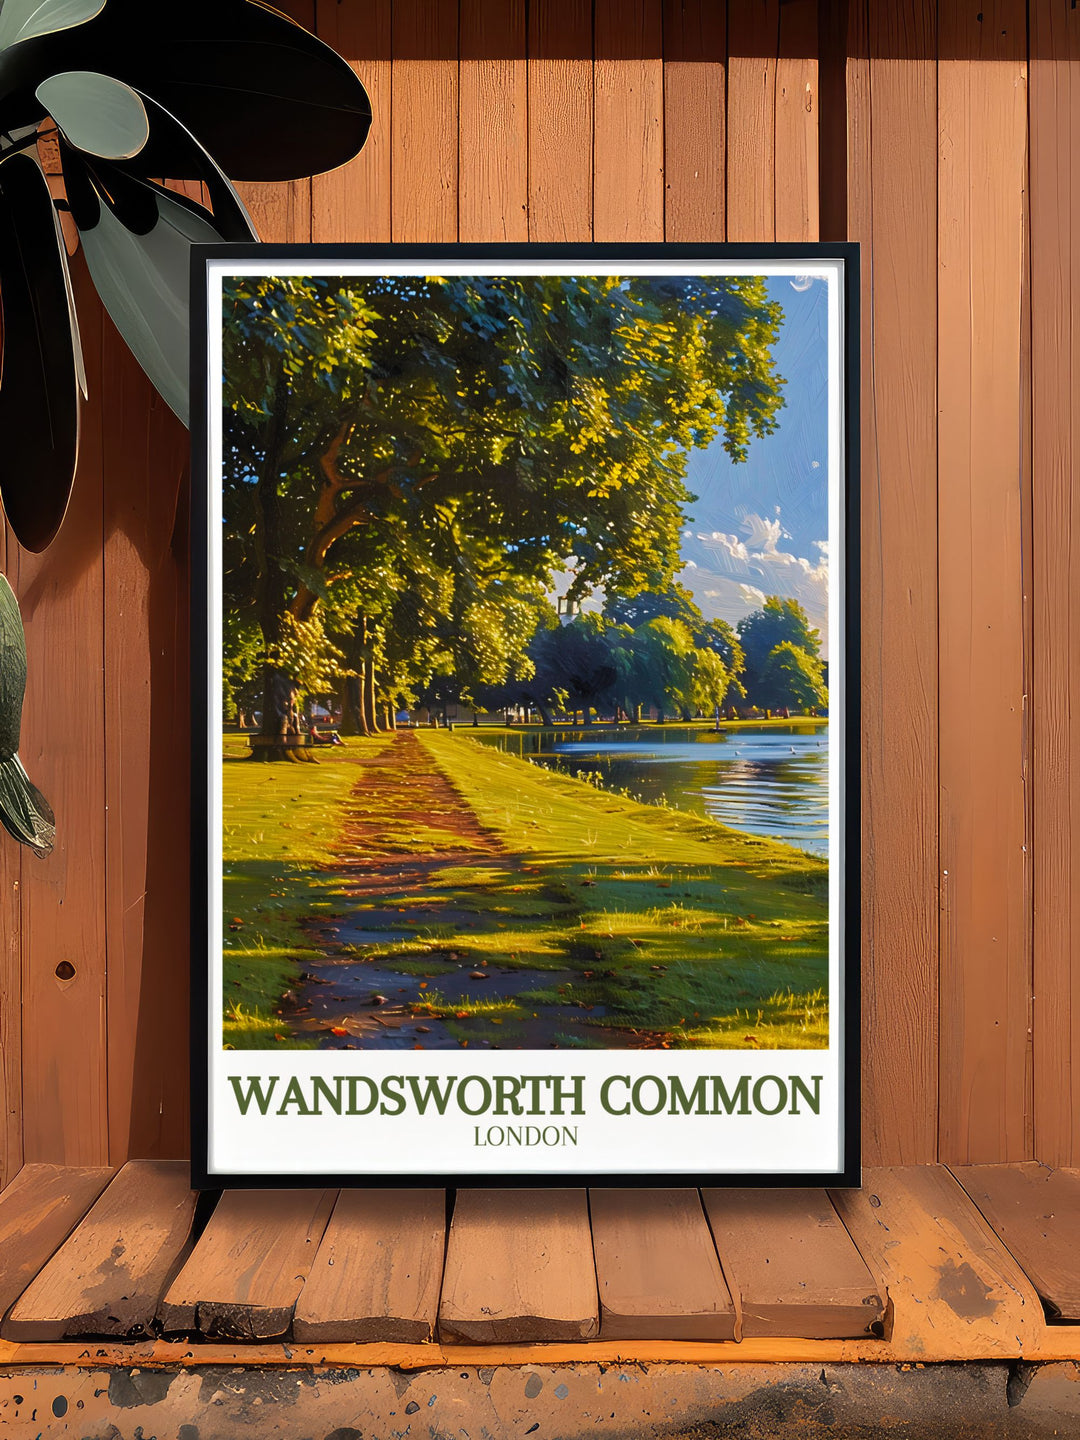 Bring the tranquility of Wandsworth Common into your home with this retro railway print. This artwork captures the essence of Wandsworth Park and the surrounding Clapham London area, perfect for those who appreciate nostalgic and elegant decor.